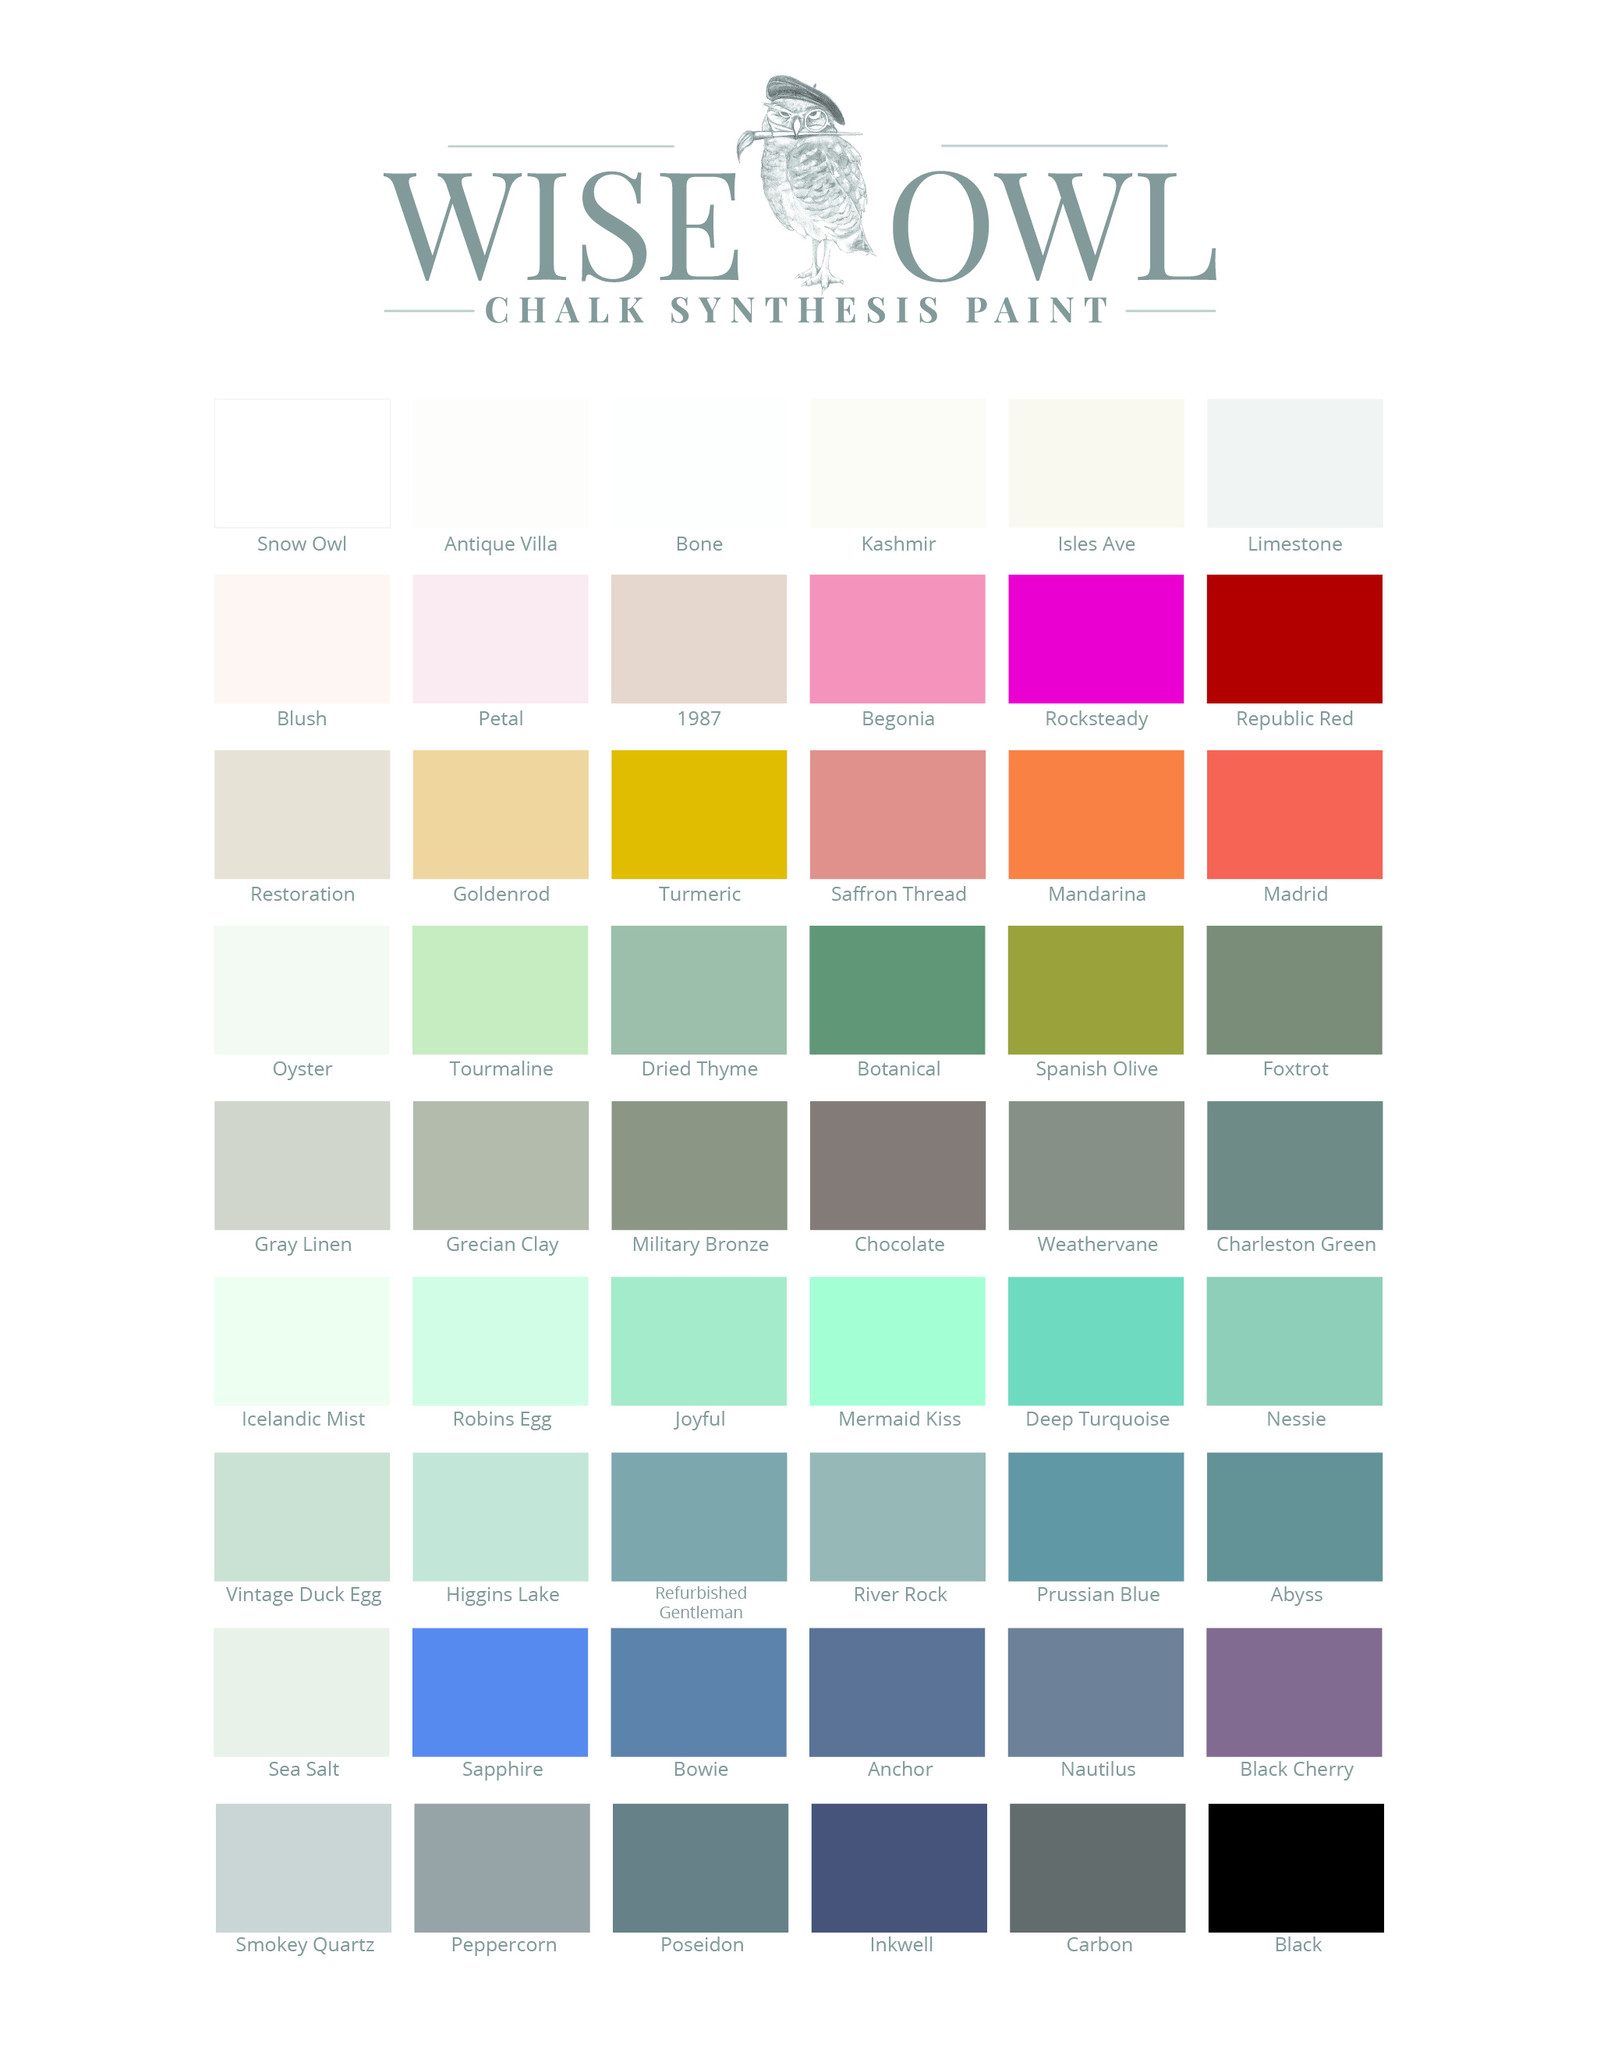 Wise Owl Paint Chalk Synthesis Paint-Botanical Pint